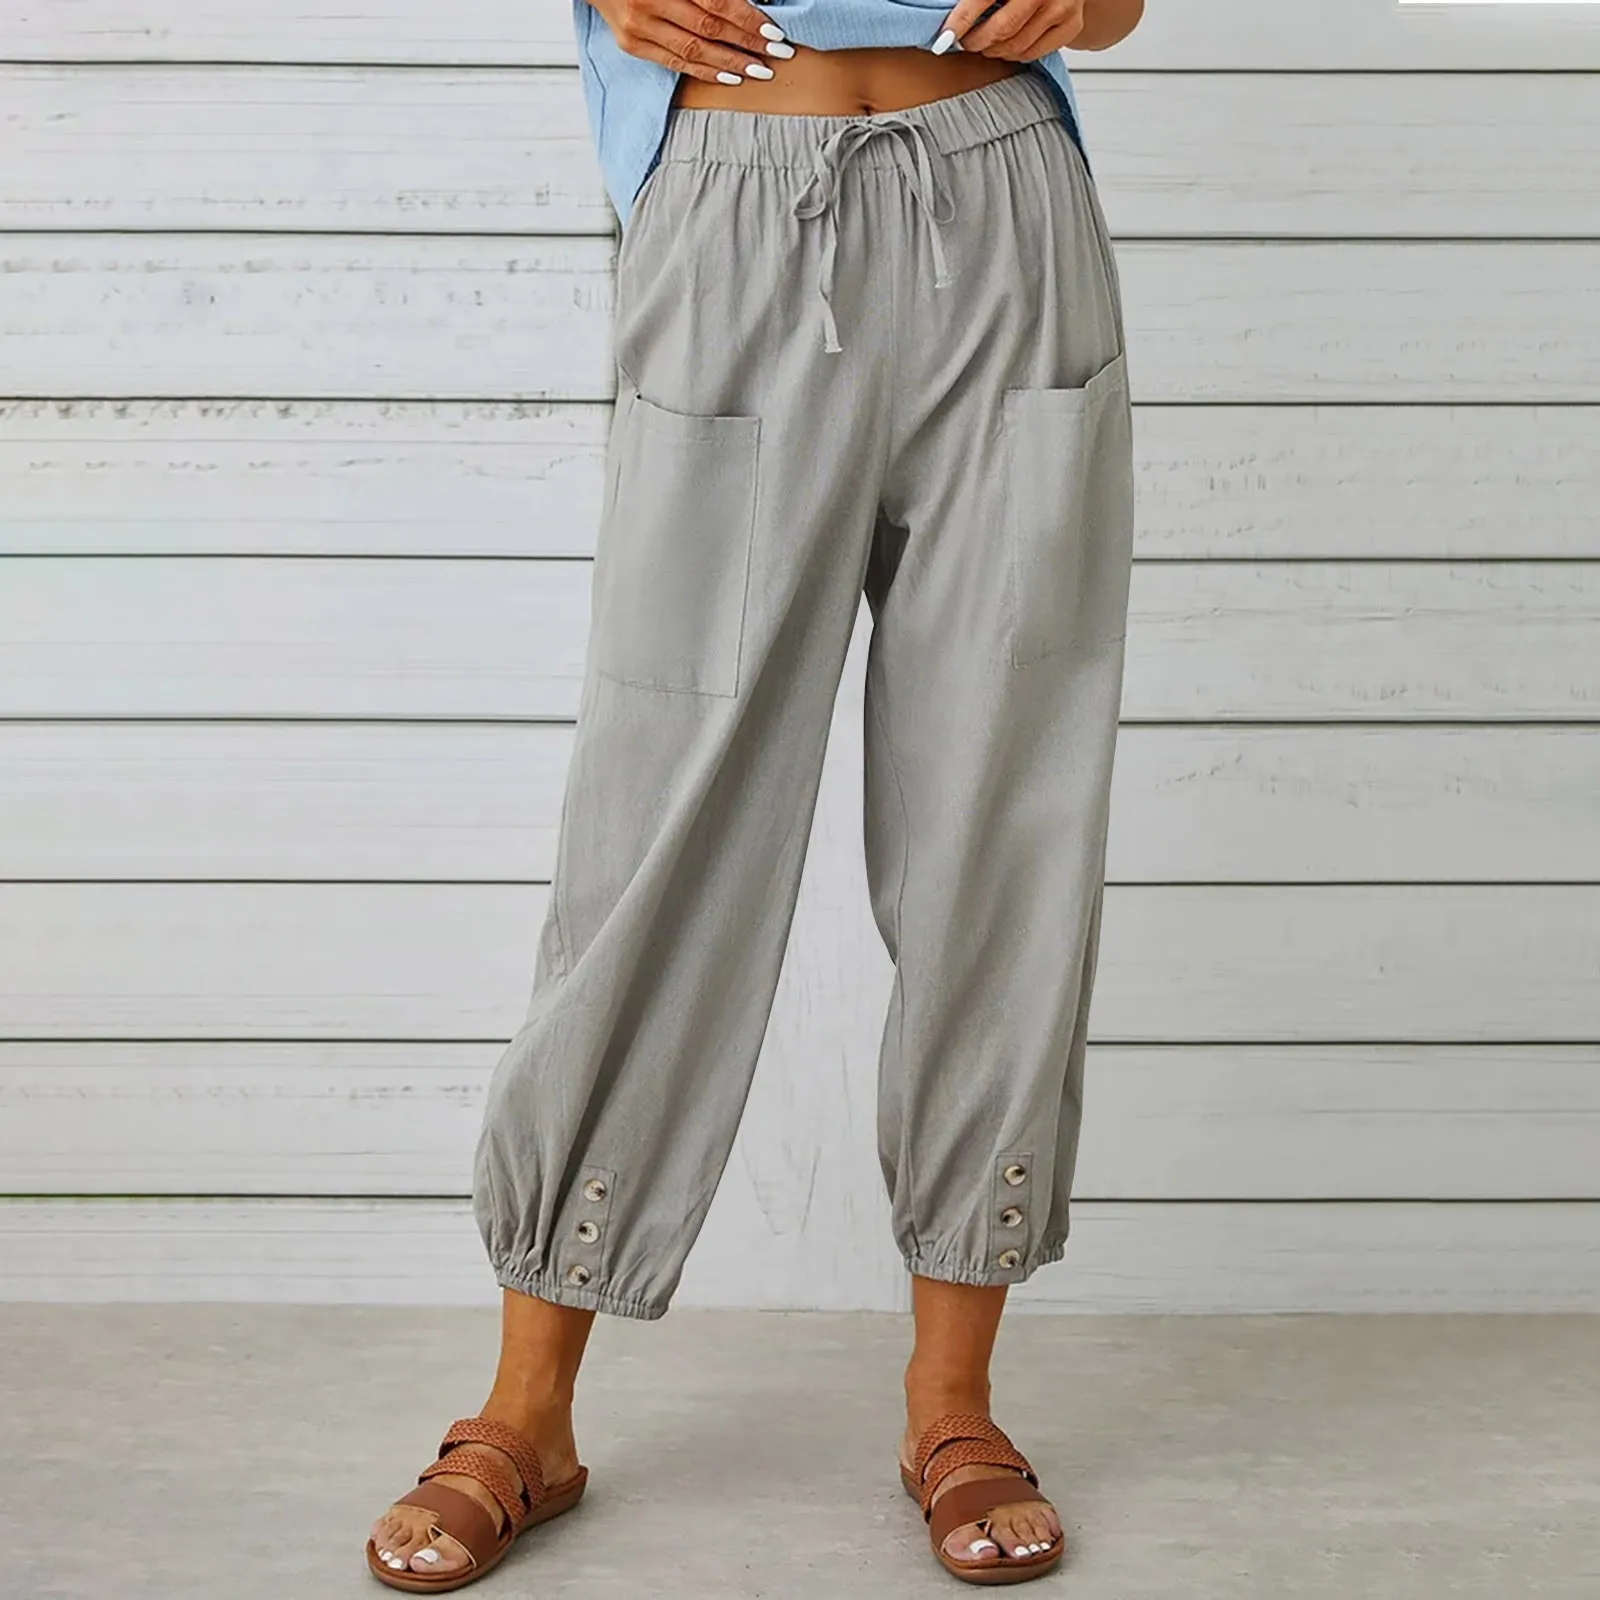 

Vintage Cargo Pants Baggy Jeans Women Fashion 90s Streetwear Summer High Waisted Linen Pants Long Pant Trousers Comfy Casual